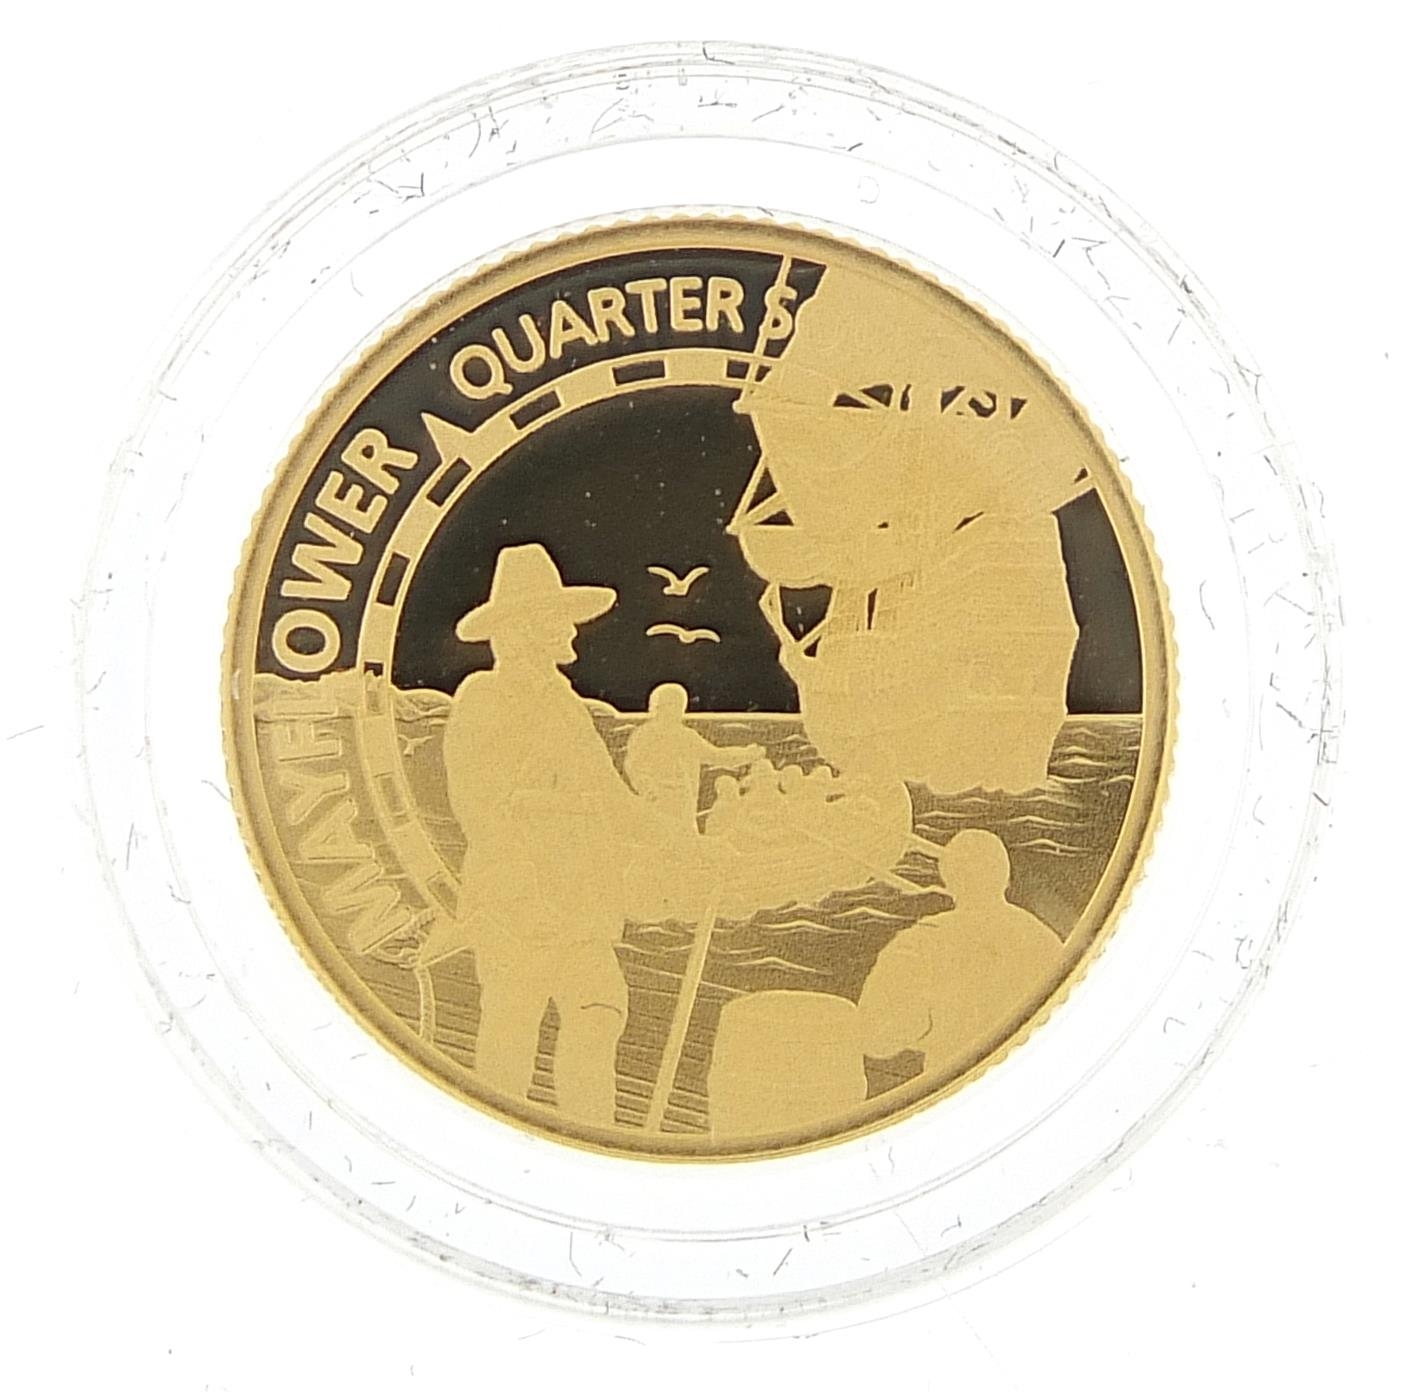 Elizabeth II 2020 Mayflower gold quarter sovereign housed in a Hattons of London box - this lot is - Image 2 of 3